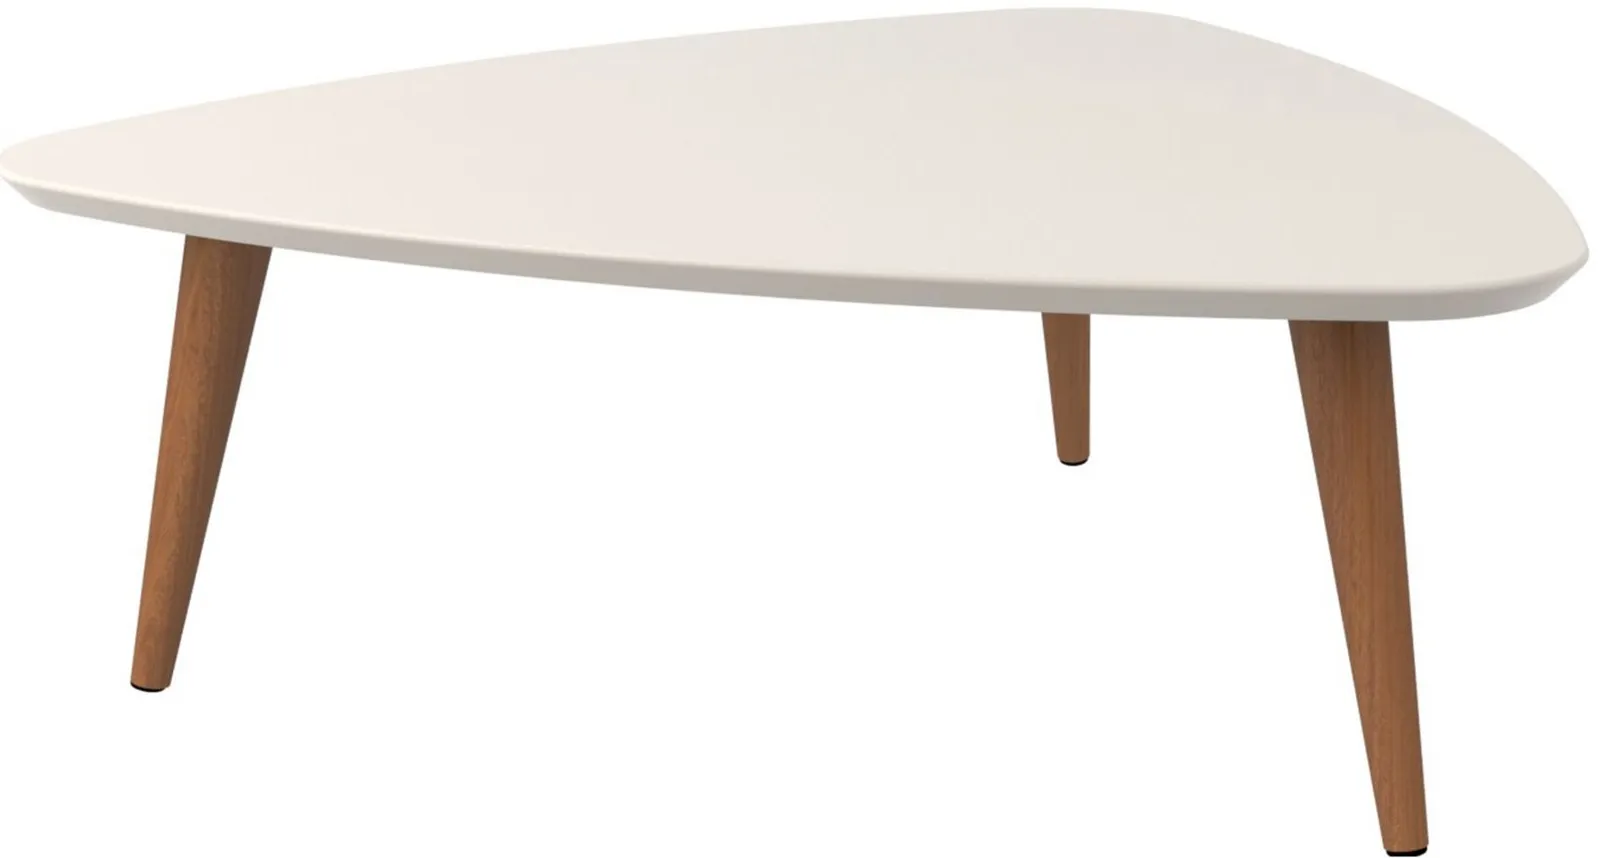 Utopia Low Triangle Coffee Table in Off White by Manhattan Comfort